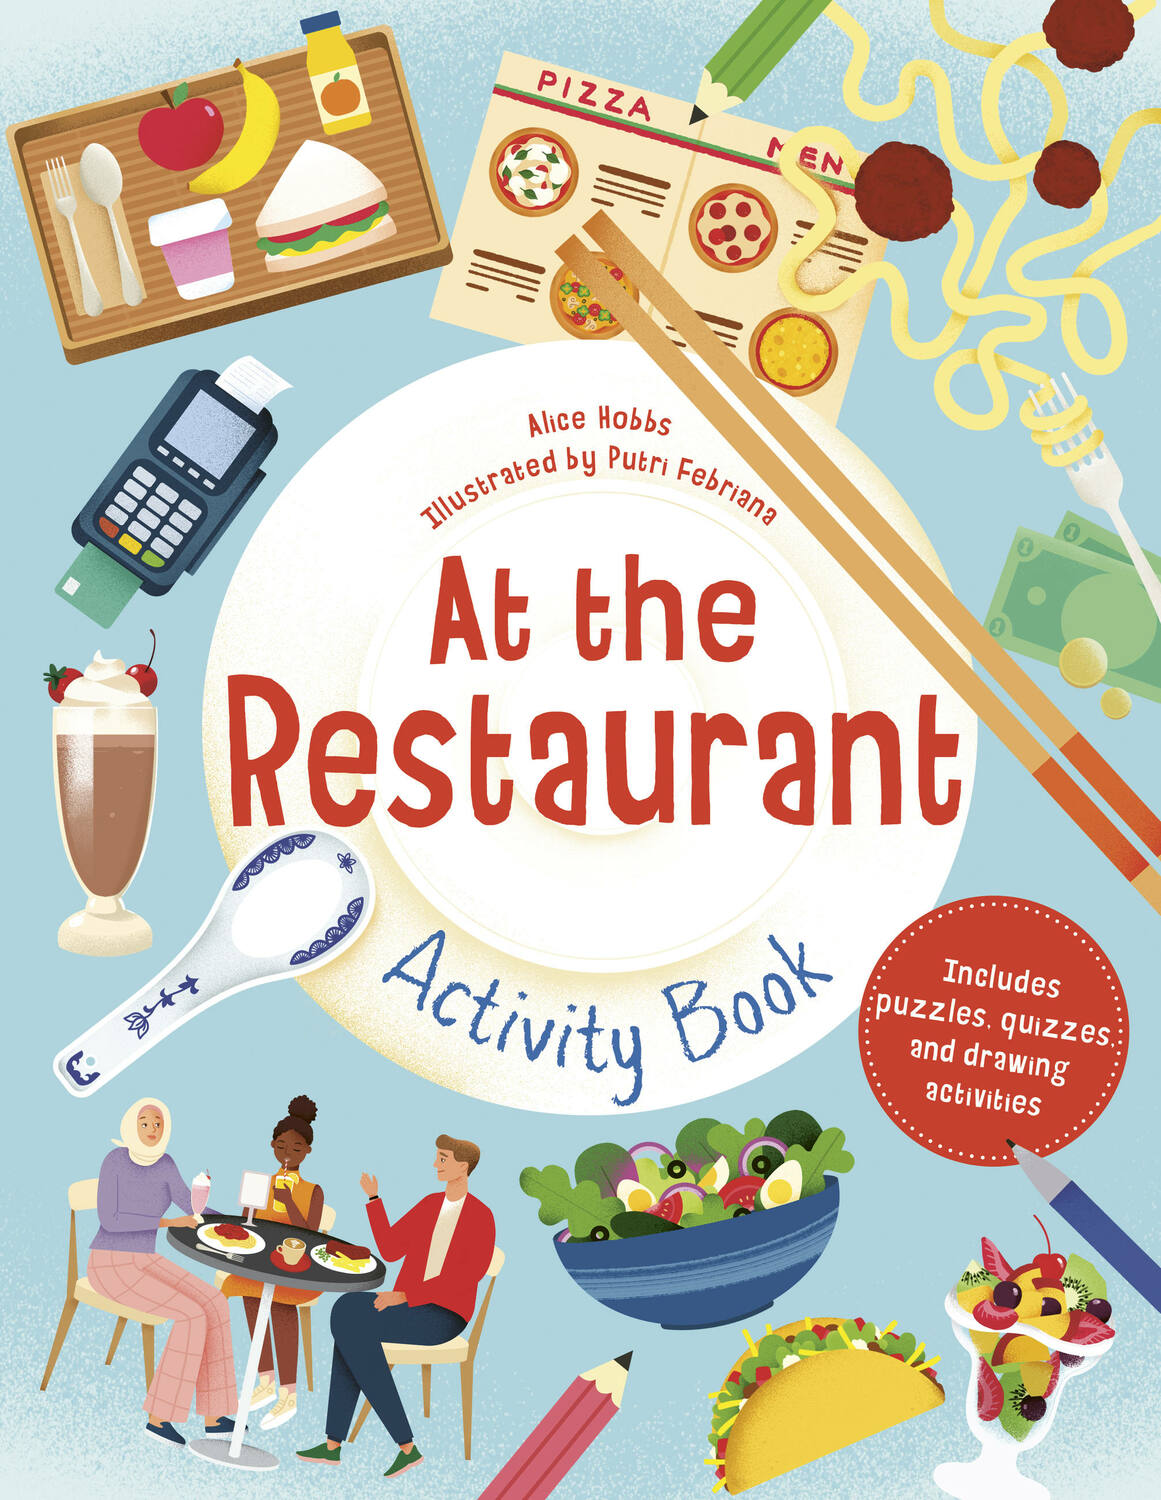 At the Restaurant Activity Book: Includes puzzles, quizzes, and drawing activities